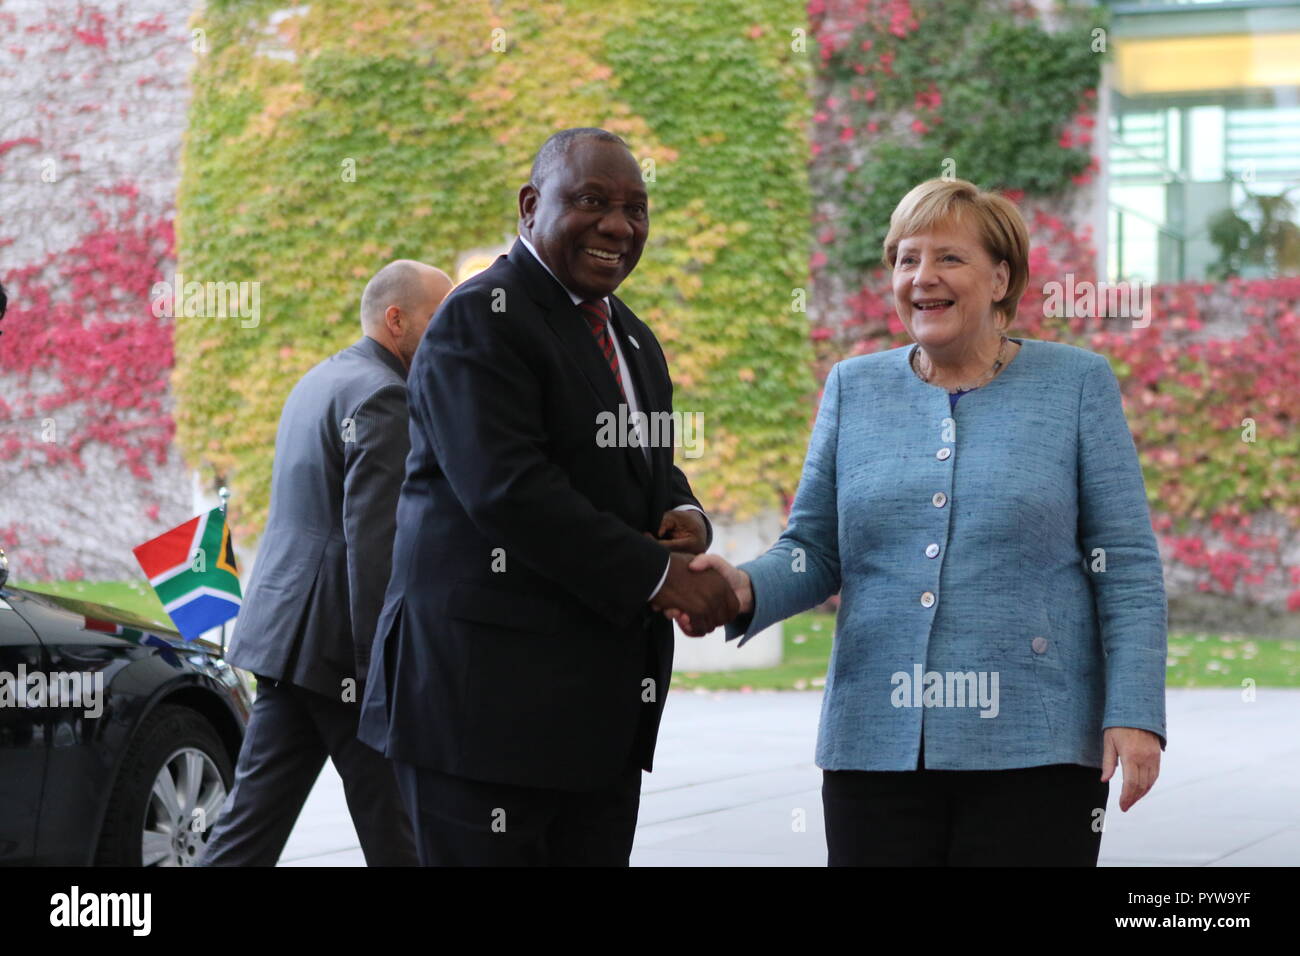 Berlin, Germany. 30th October, 2018. Chancellor Angela Merkel and Cyril Ramaphosa, President South Africa  at the reception in the courtyard of the Federal Chancellery.The meeting will take place within the framework of Compact with Africa. Credit: SAO Struck/Alamy Live News Stock Photo